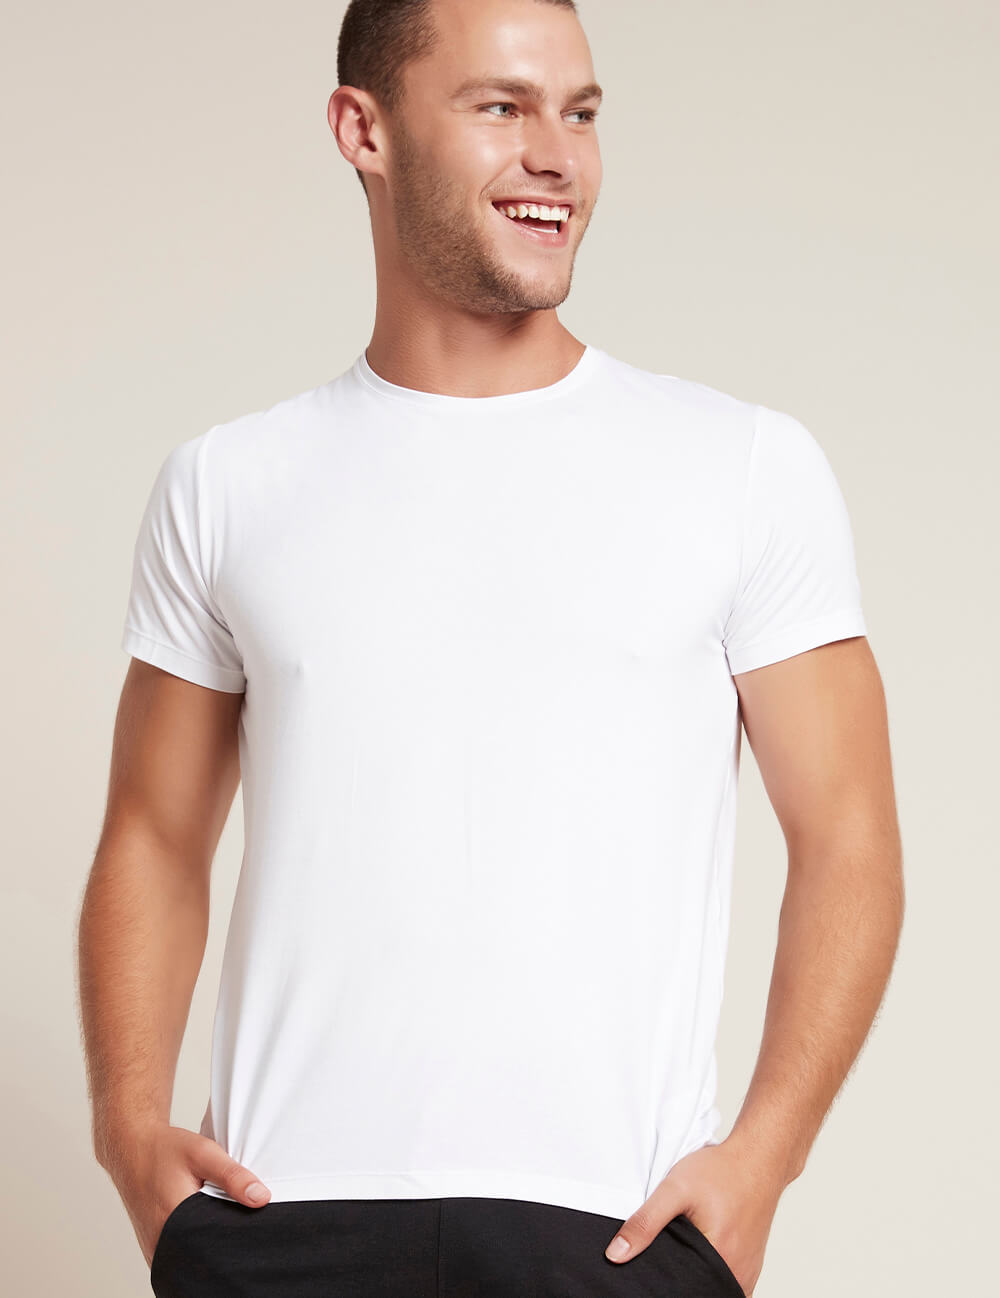 Mens-Active-Muscle-Tee-White-Front-2.jpg